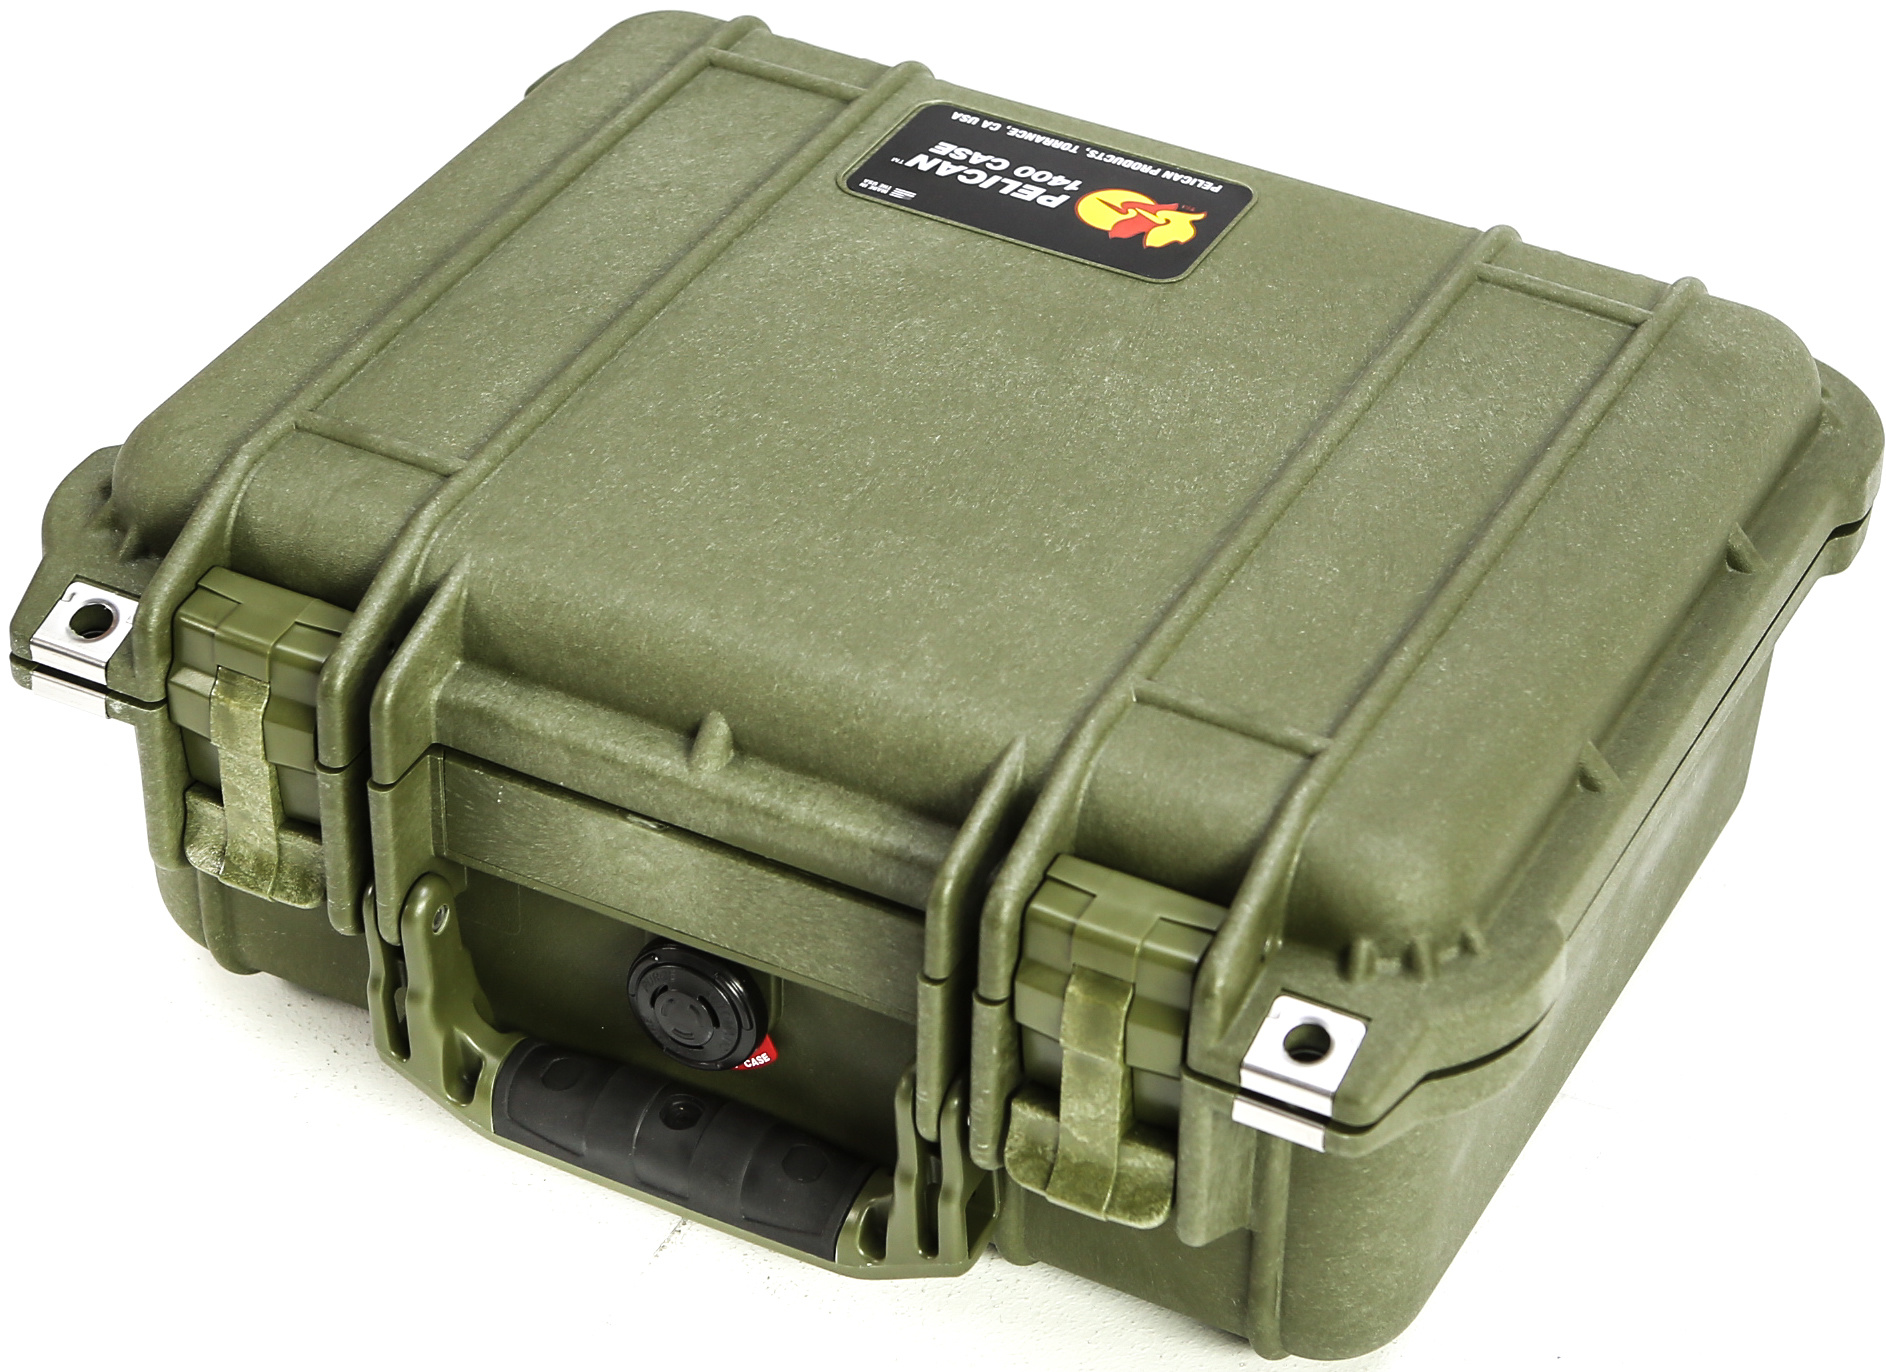 Pelican 1400 Case (Olive Drab Green)